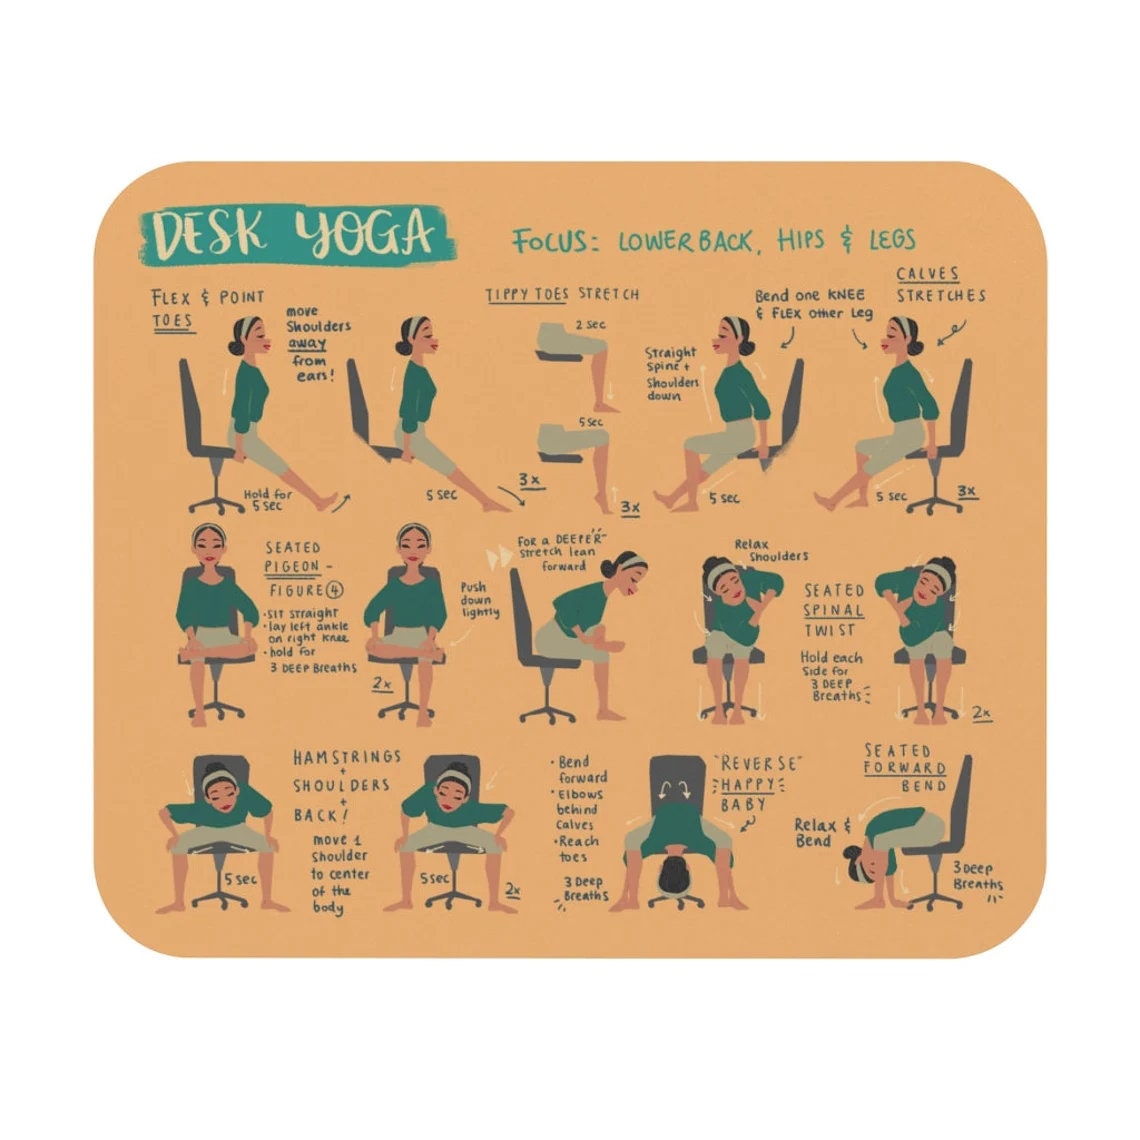 Chair Yoga at Work? Yes, Please!